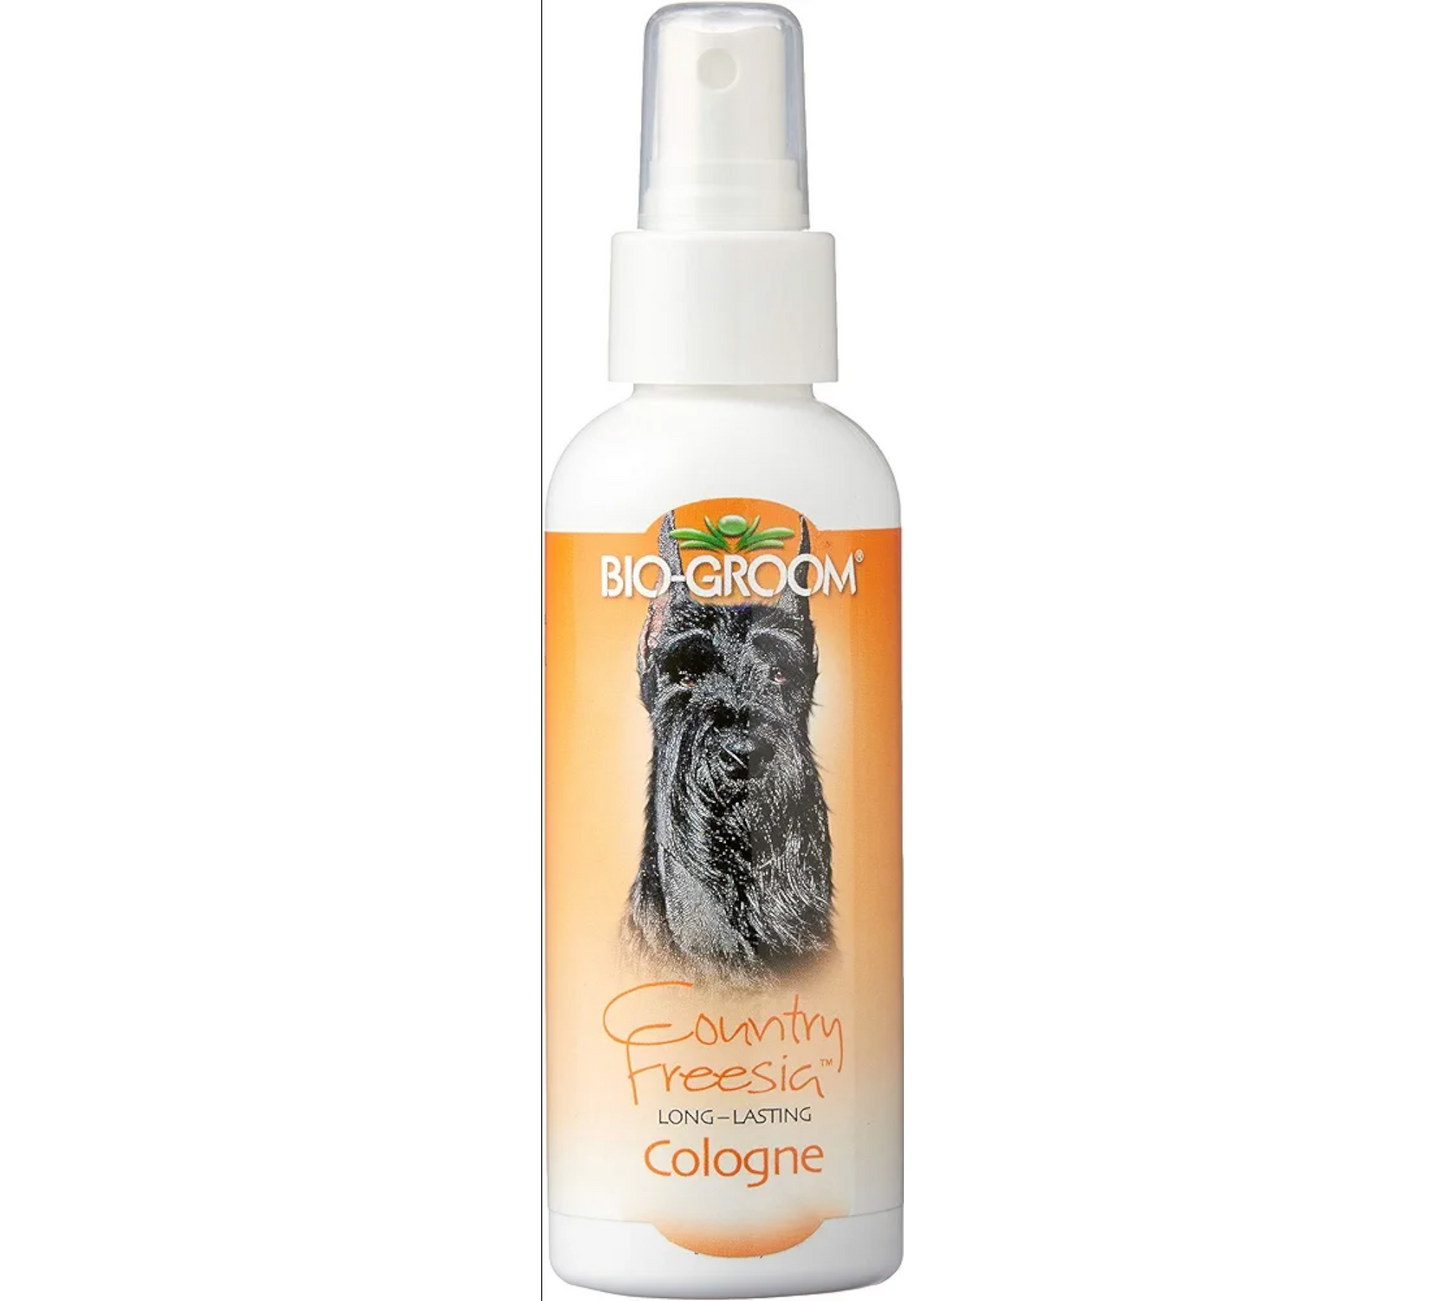 Bio Groom Natural Scents Country Freesia Cologne,